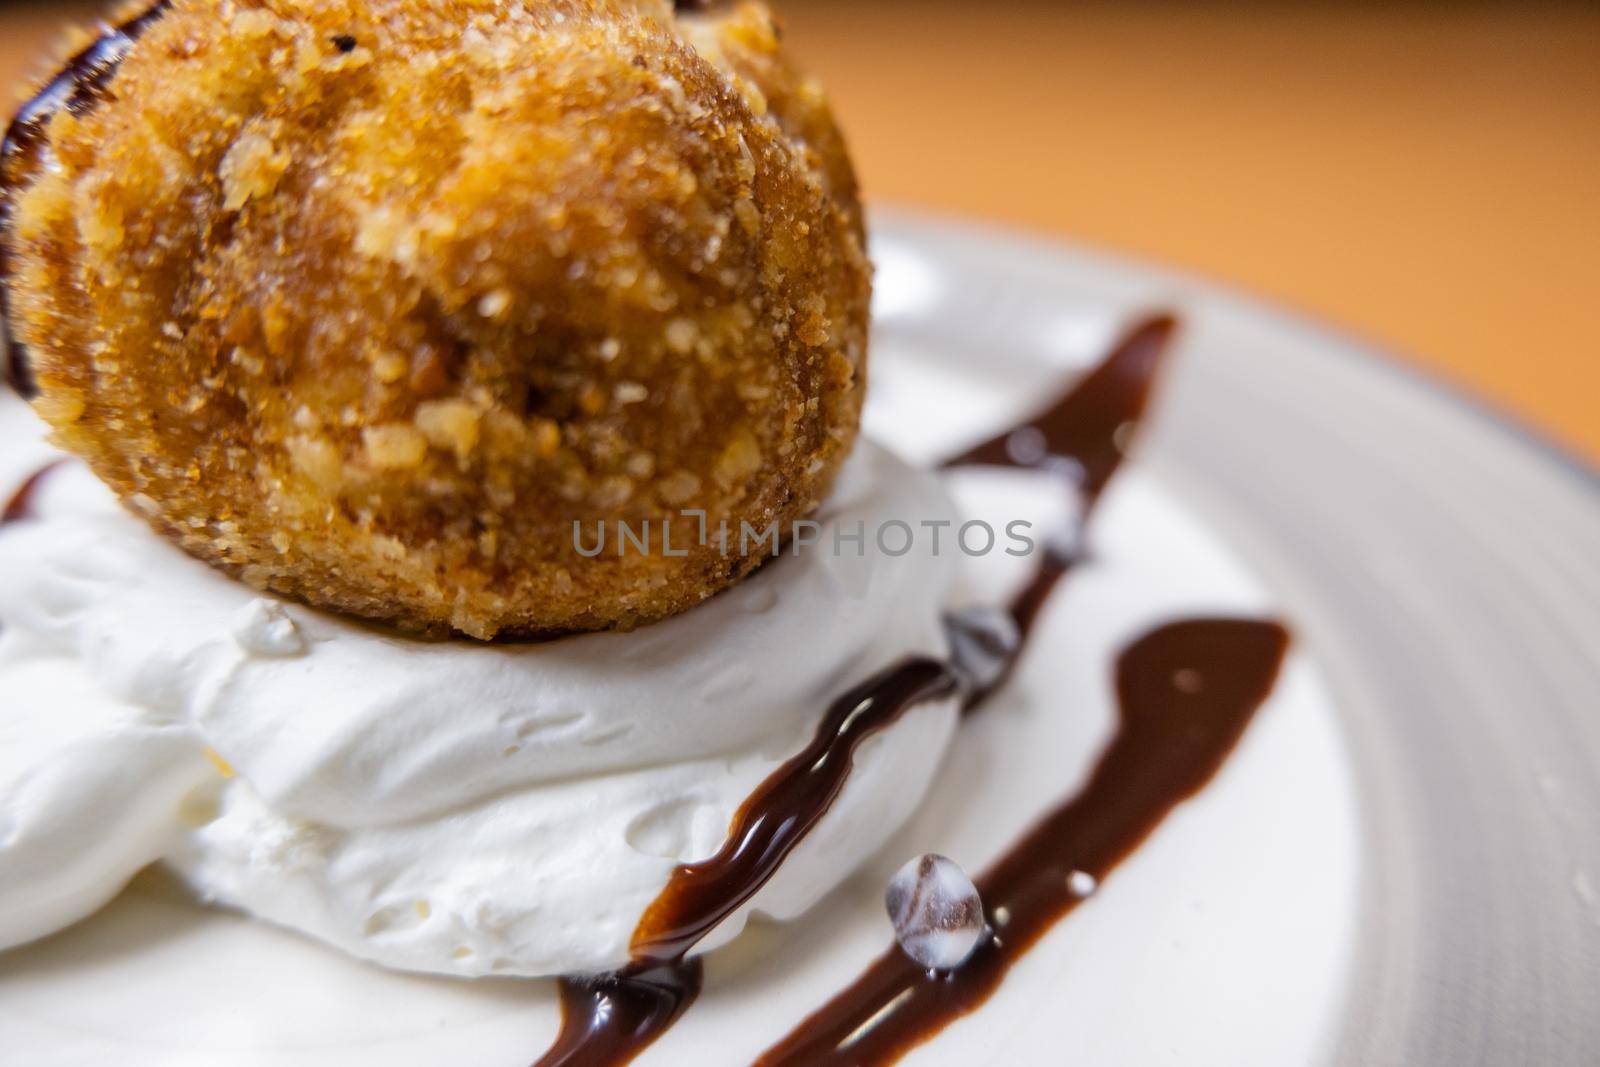 Close-up of fried ice cream with chocolate syrup, silver chocolate chips, and cream on white plate. Crispy Mexican fried ice cream scoop decorated with chocolate. Gourmet desserts